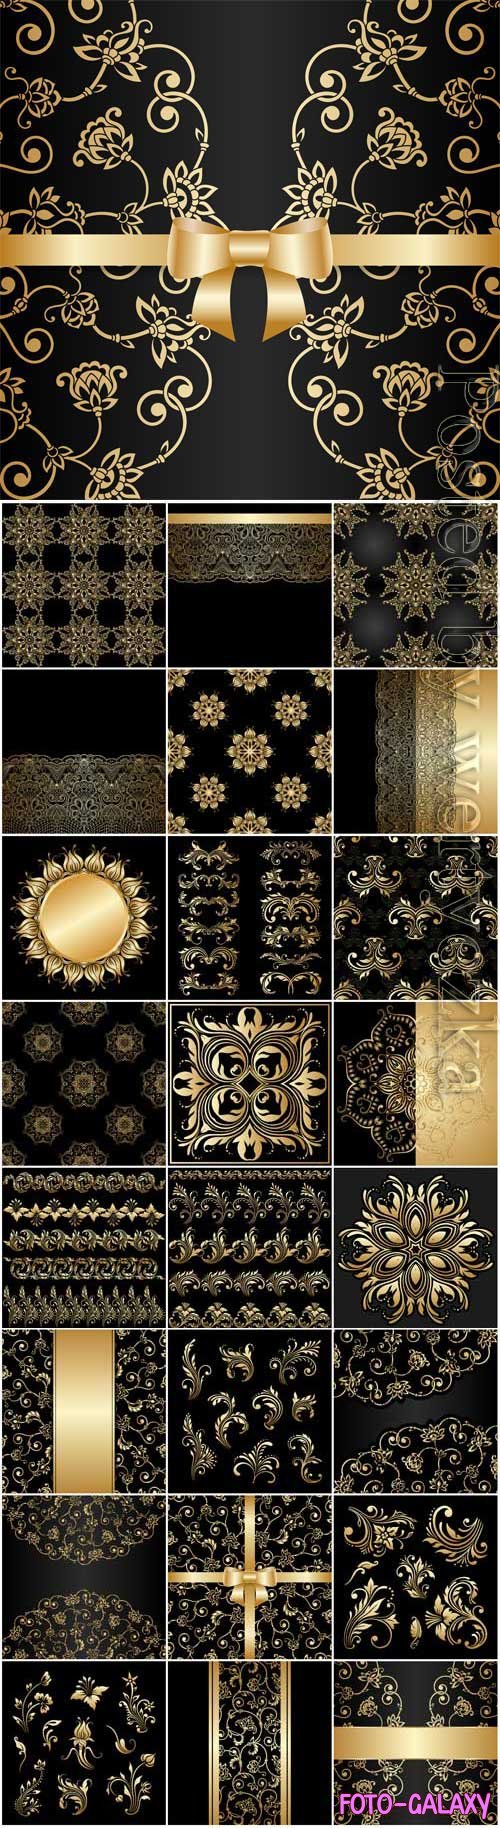 Gold decorative elements and patterns in vector